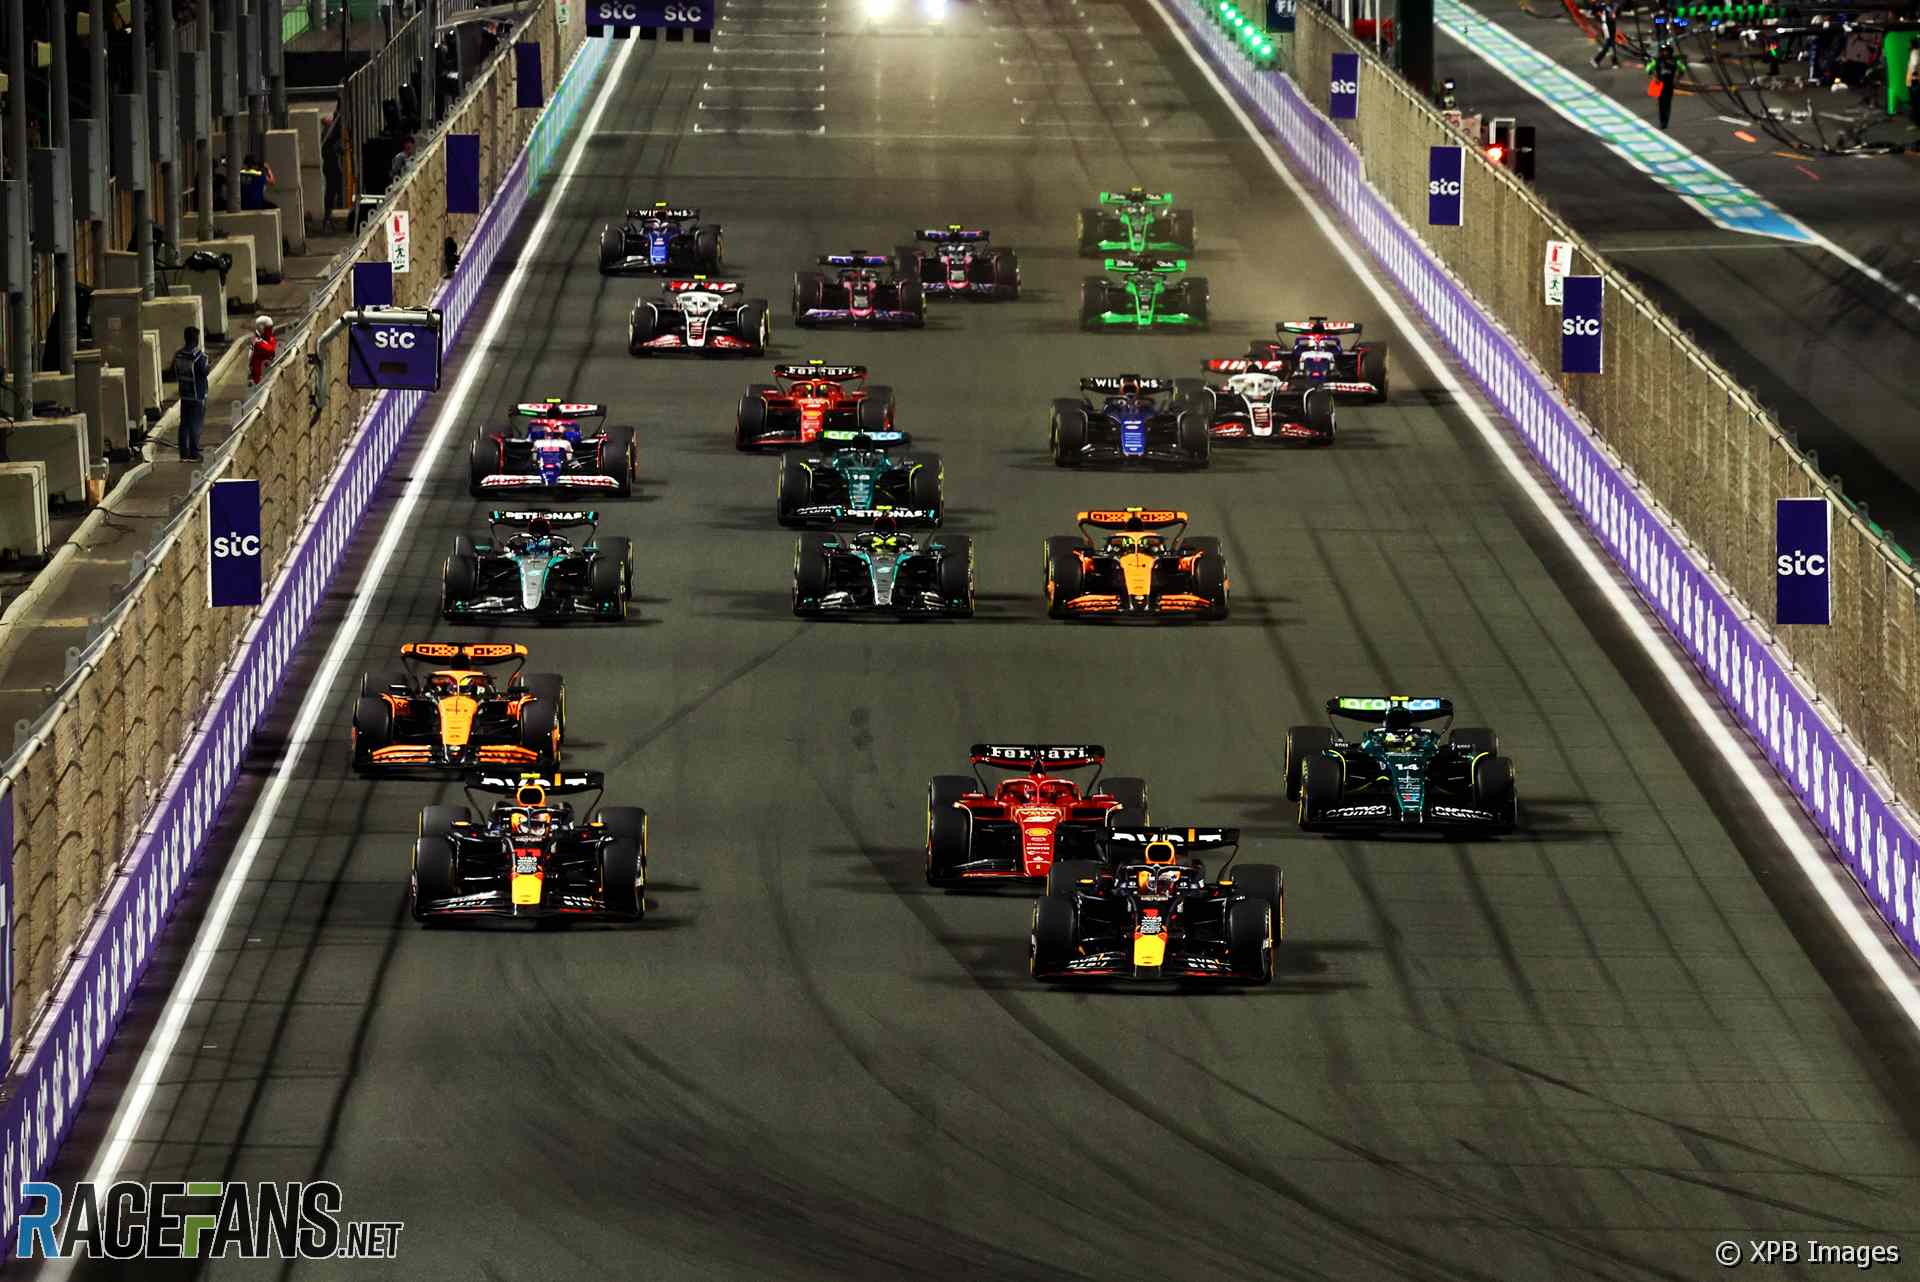 fia-tackles-jump-starts-and-teams-not-running-in-practice-with-new-f1-rules